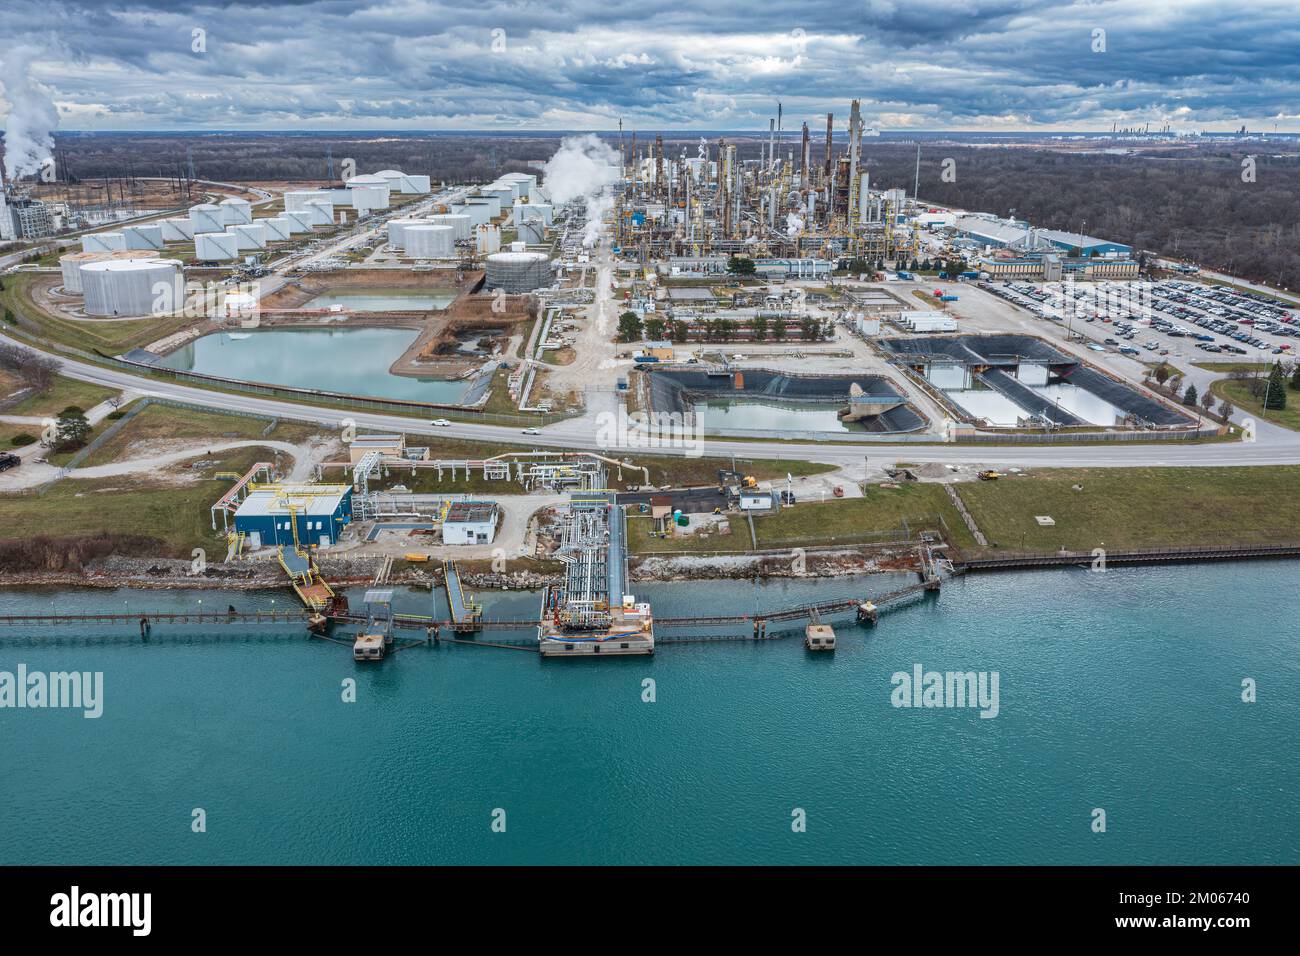 Suncor Sarnia Refinery produces petrol gasoline, kerosene, jet, and diesel fuels in Canada on the shore of the St. Clair River / Great Lakes Region Stock Photo